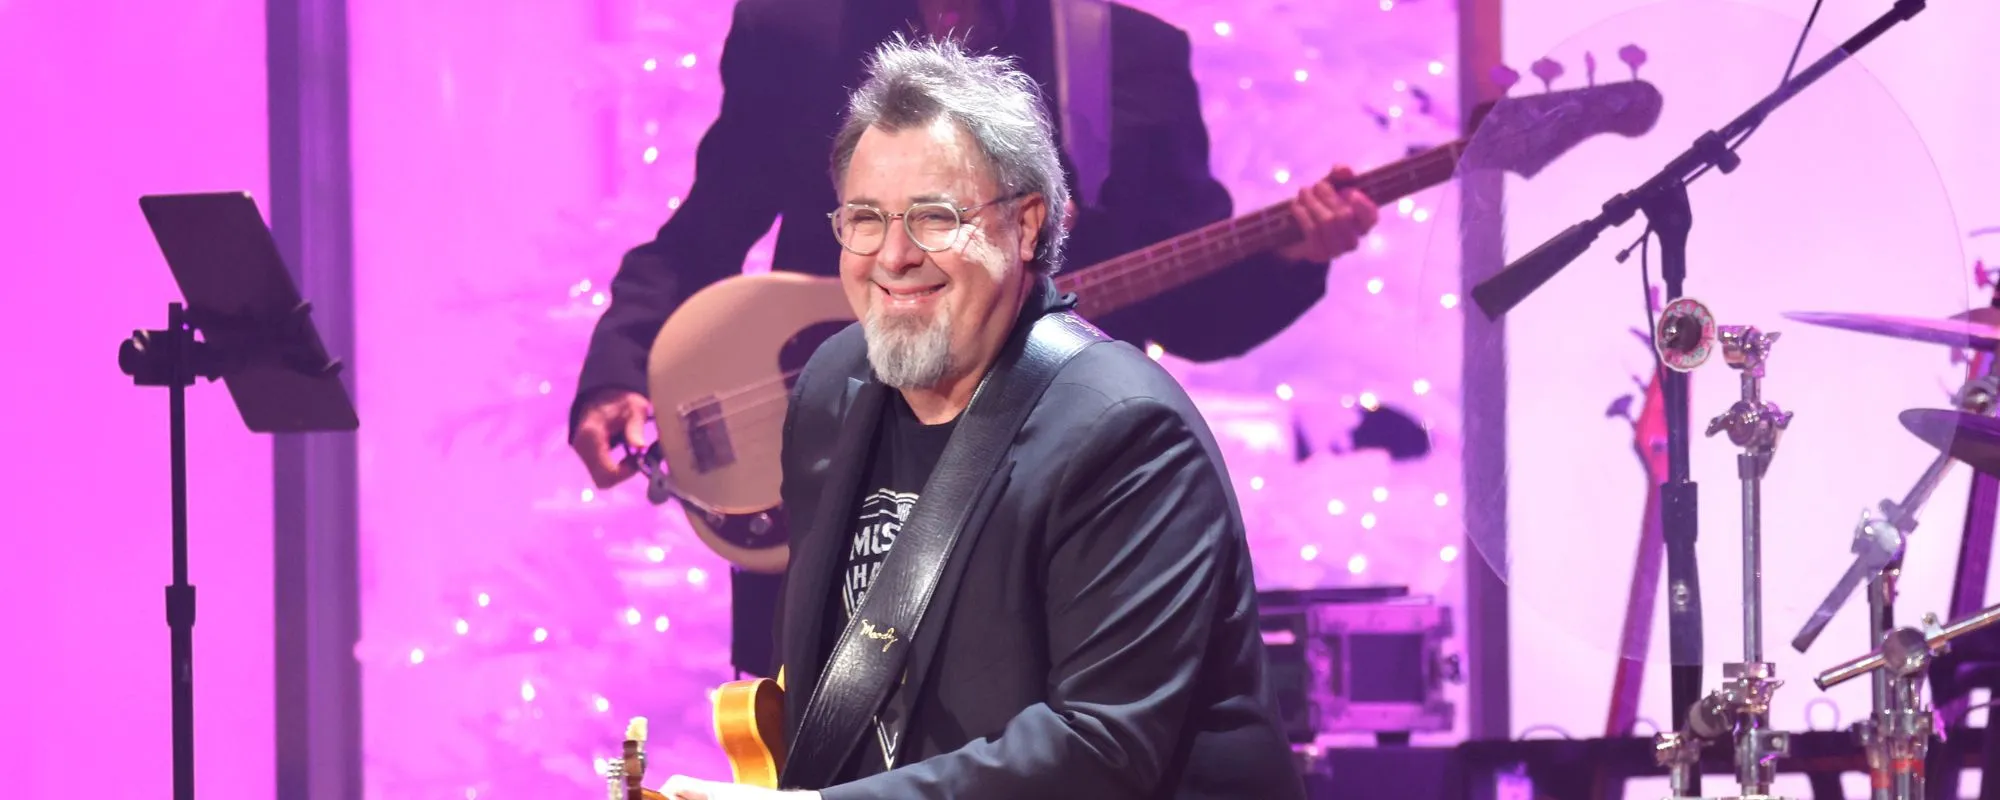 Vince Gill Dedicates Tear-Jerking Performance To Toby Keith and Blake Shelton’s Late Brother